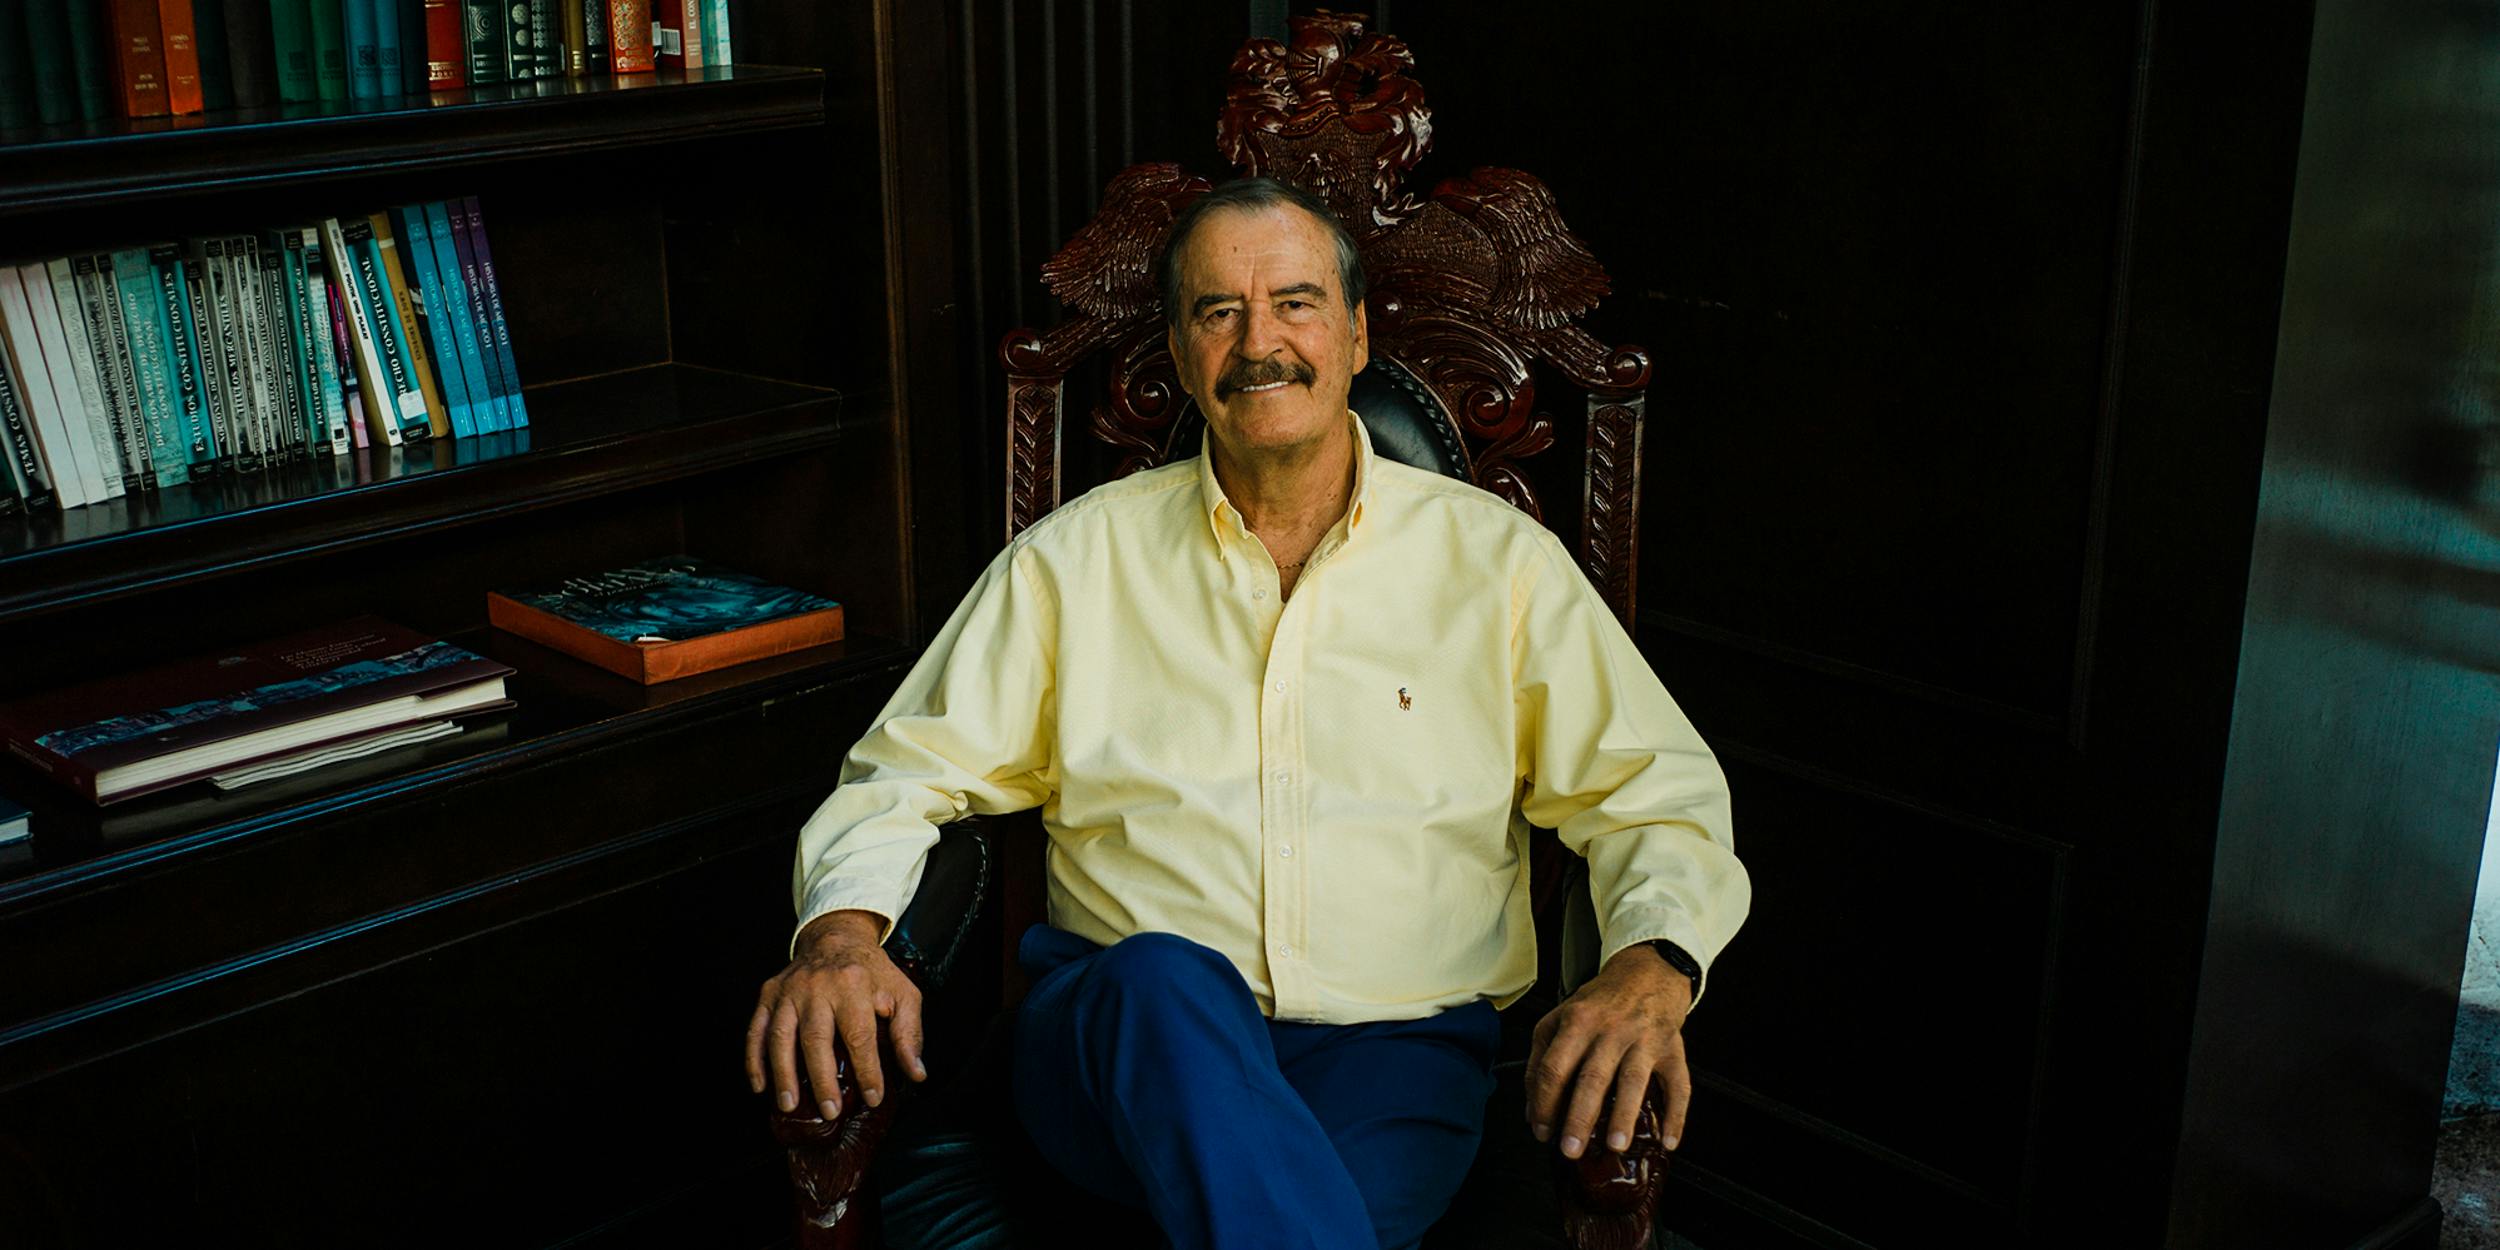 Former president of Mexico Vicente Fox explains why he thinks marijuana should be legal in Mexico. Here, he is seen at his educational center called Centro Fox in his replica presidential office in Guanajuato, Mexico. (Photo by Scott Brennan for Herb)